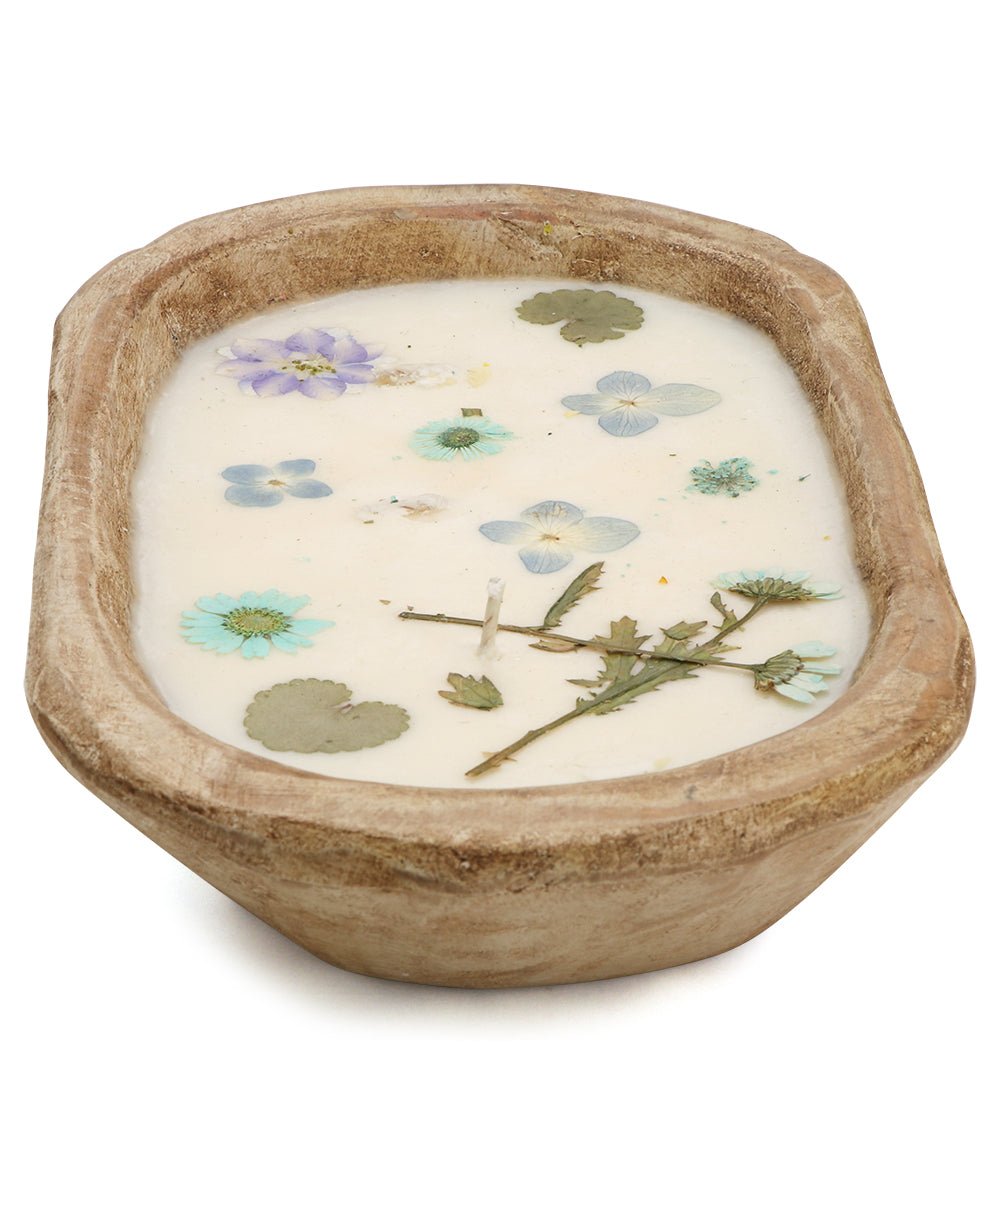 Pressed Flowers Soy Candle in Sustainable Wood Bowl - Candles